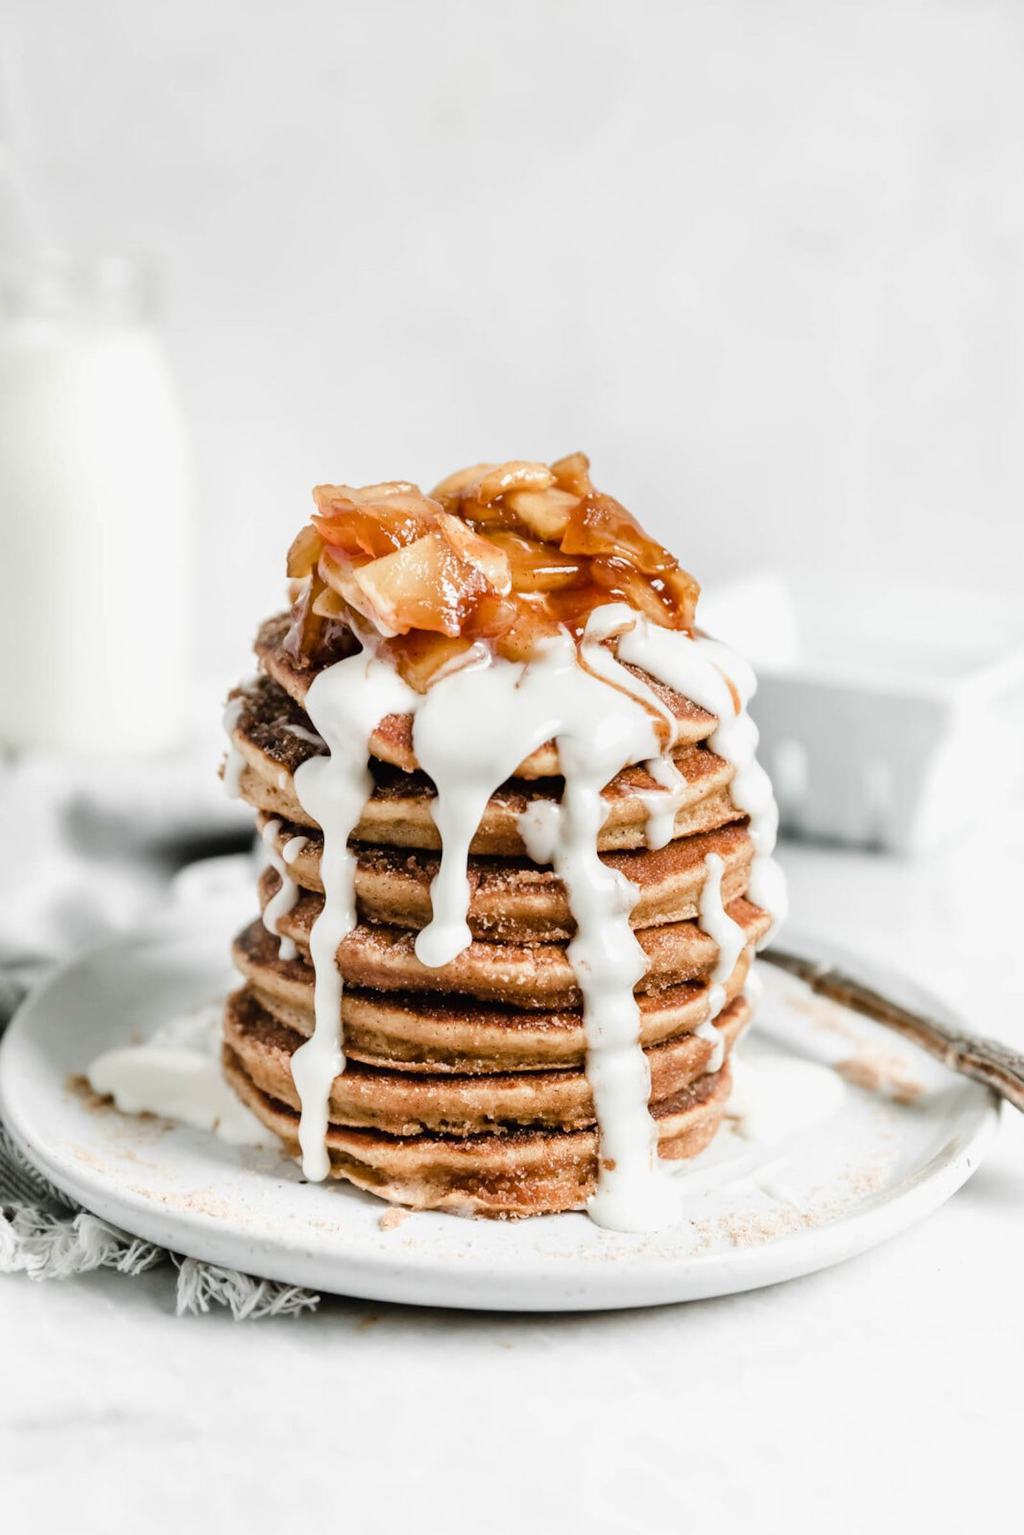 10 Delicious And Flavorful Pancake Recipes That Say “Happy Fall, Y’All!”